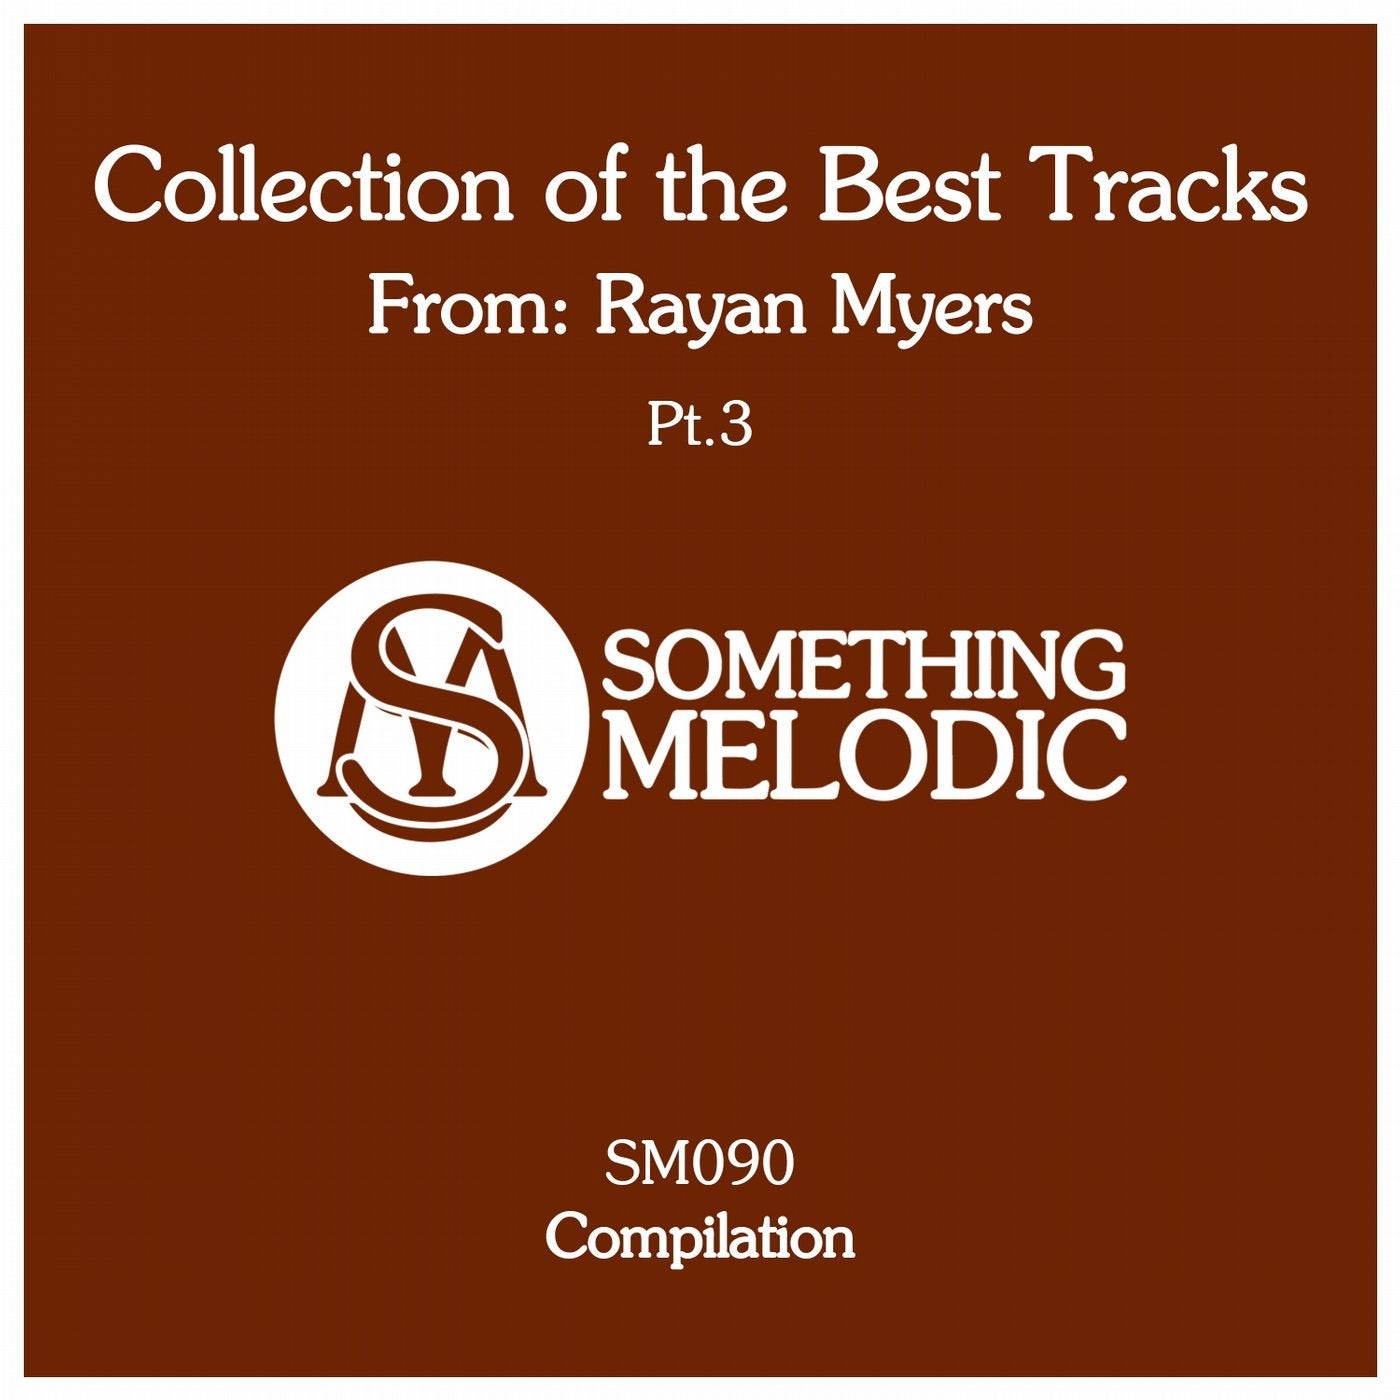 Collection of the Best Tracks From: Rayan Myers, Pt. 3